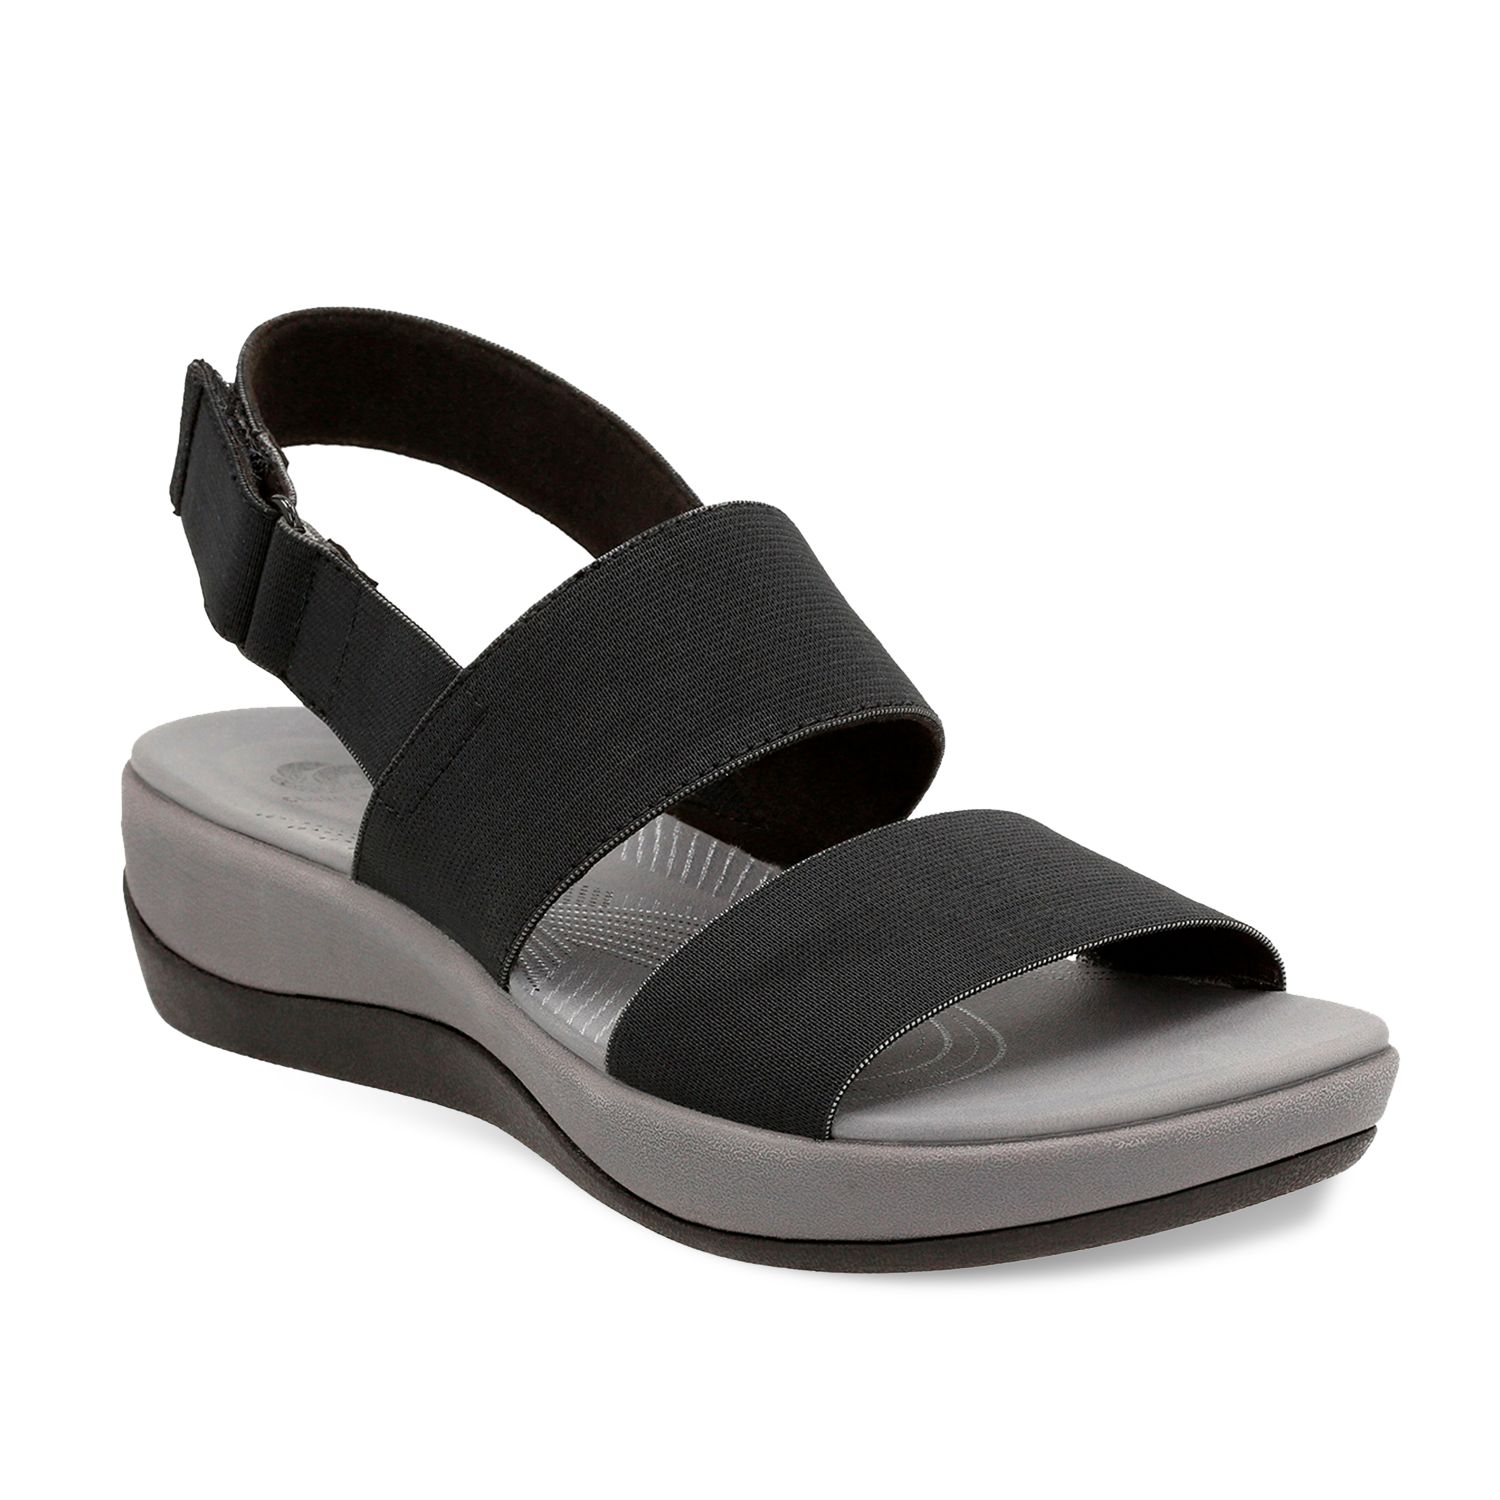 clarks cloudsteppers womens sandals